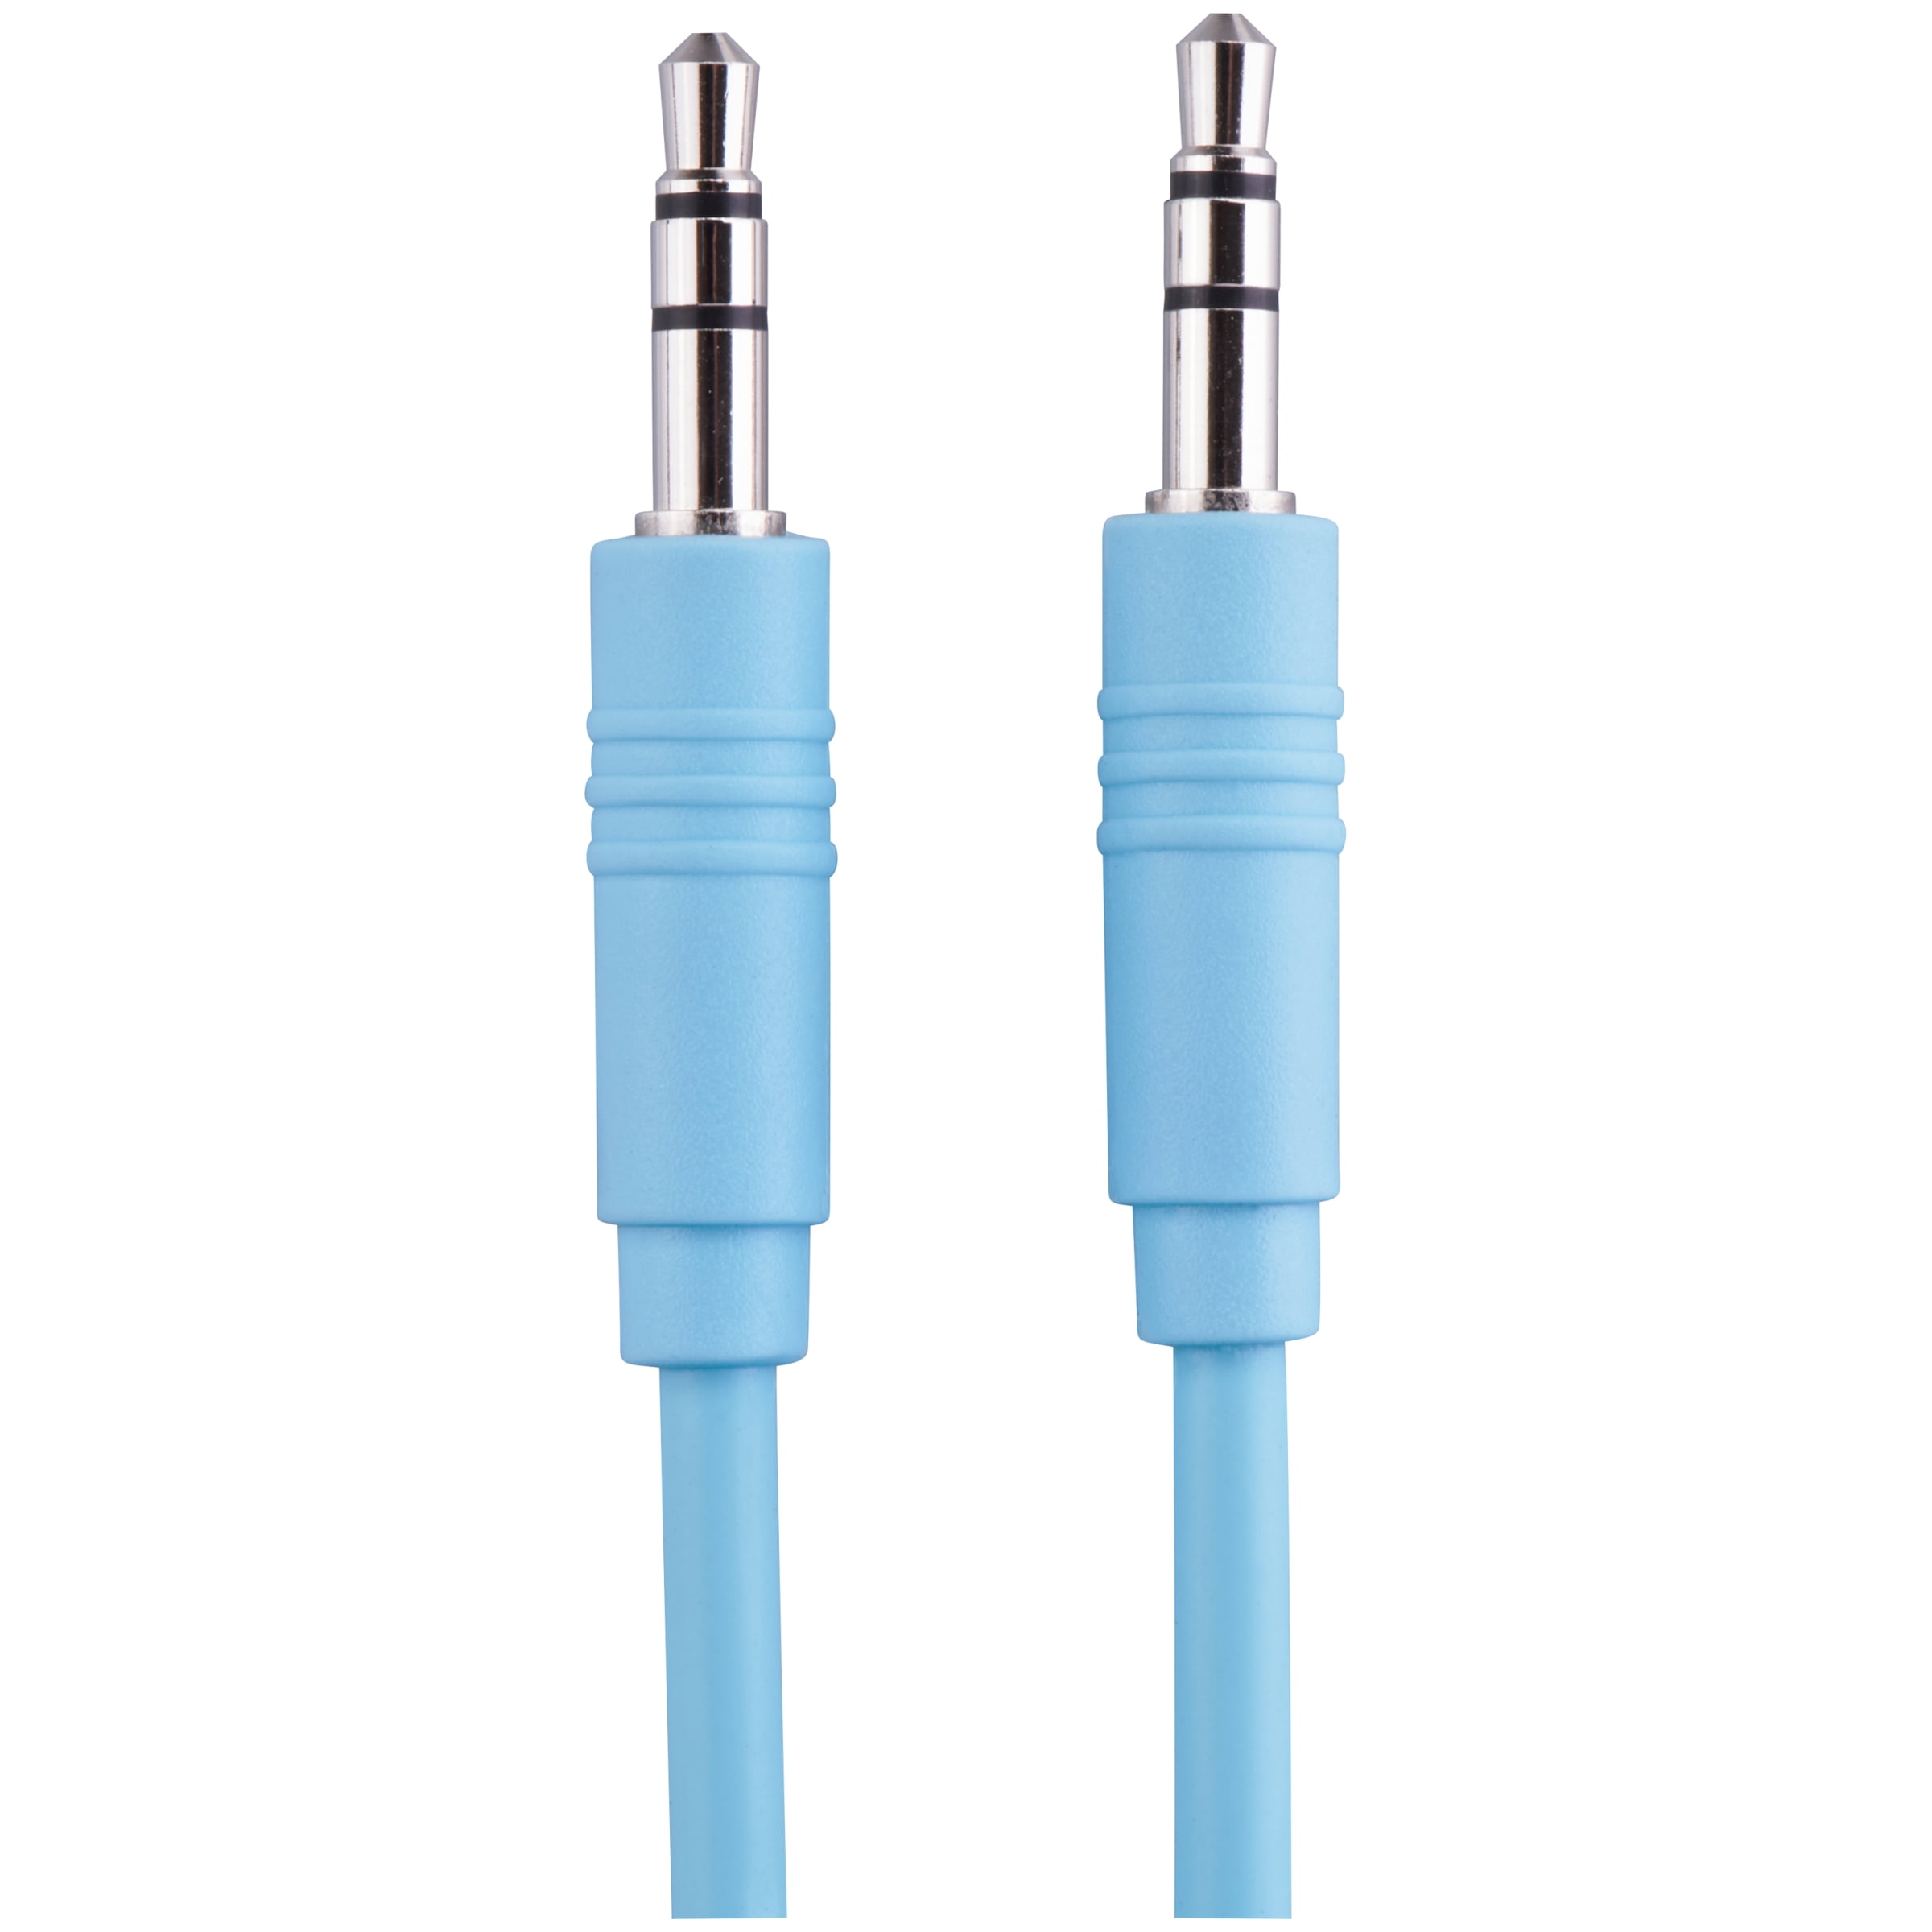 Onn Aux Cable, 3 Foot, Teal